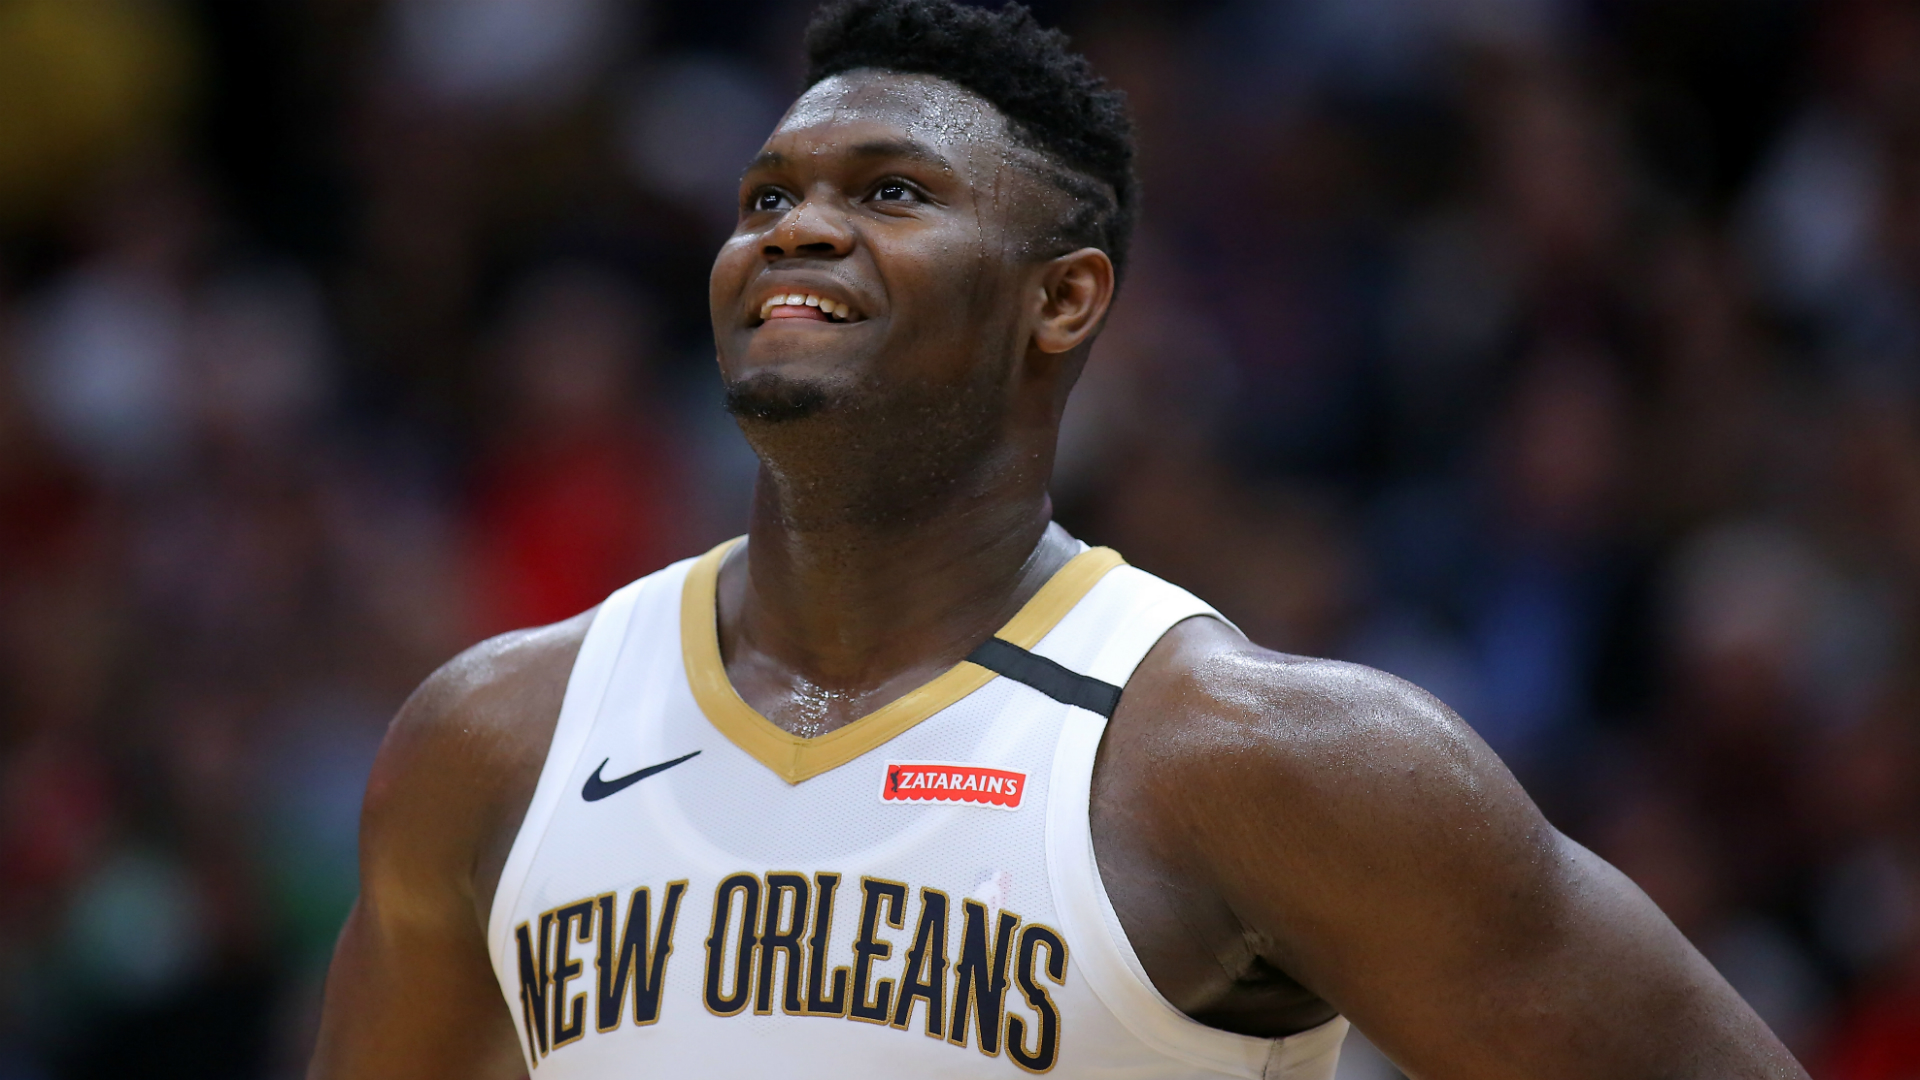 People Are Angry Zion Williamson Is The Nba 2k Next Gen Athlete Over Luka Doncic Ja Morant Sporting News